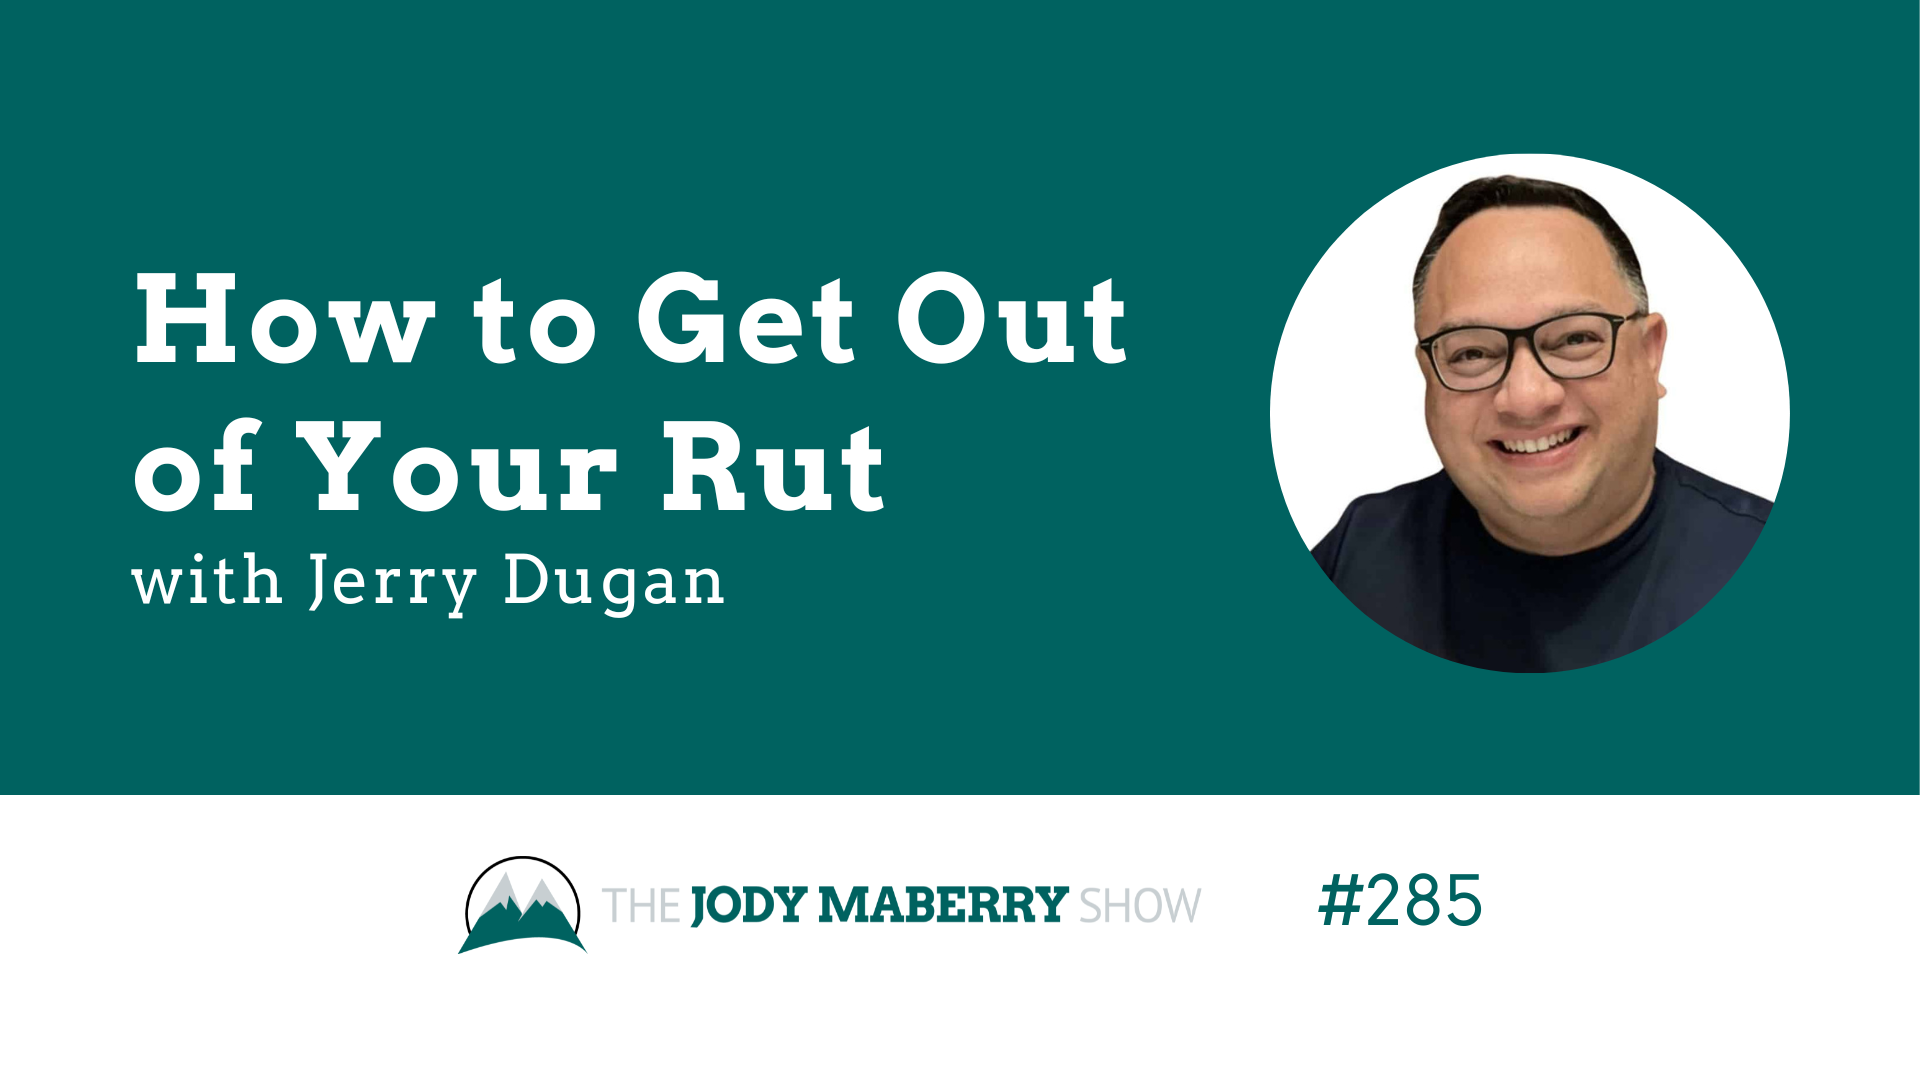 Jody Maberry Show Episode 285 How to Get Out of Your Rut